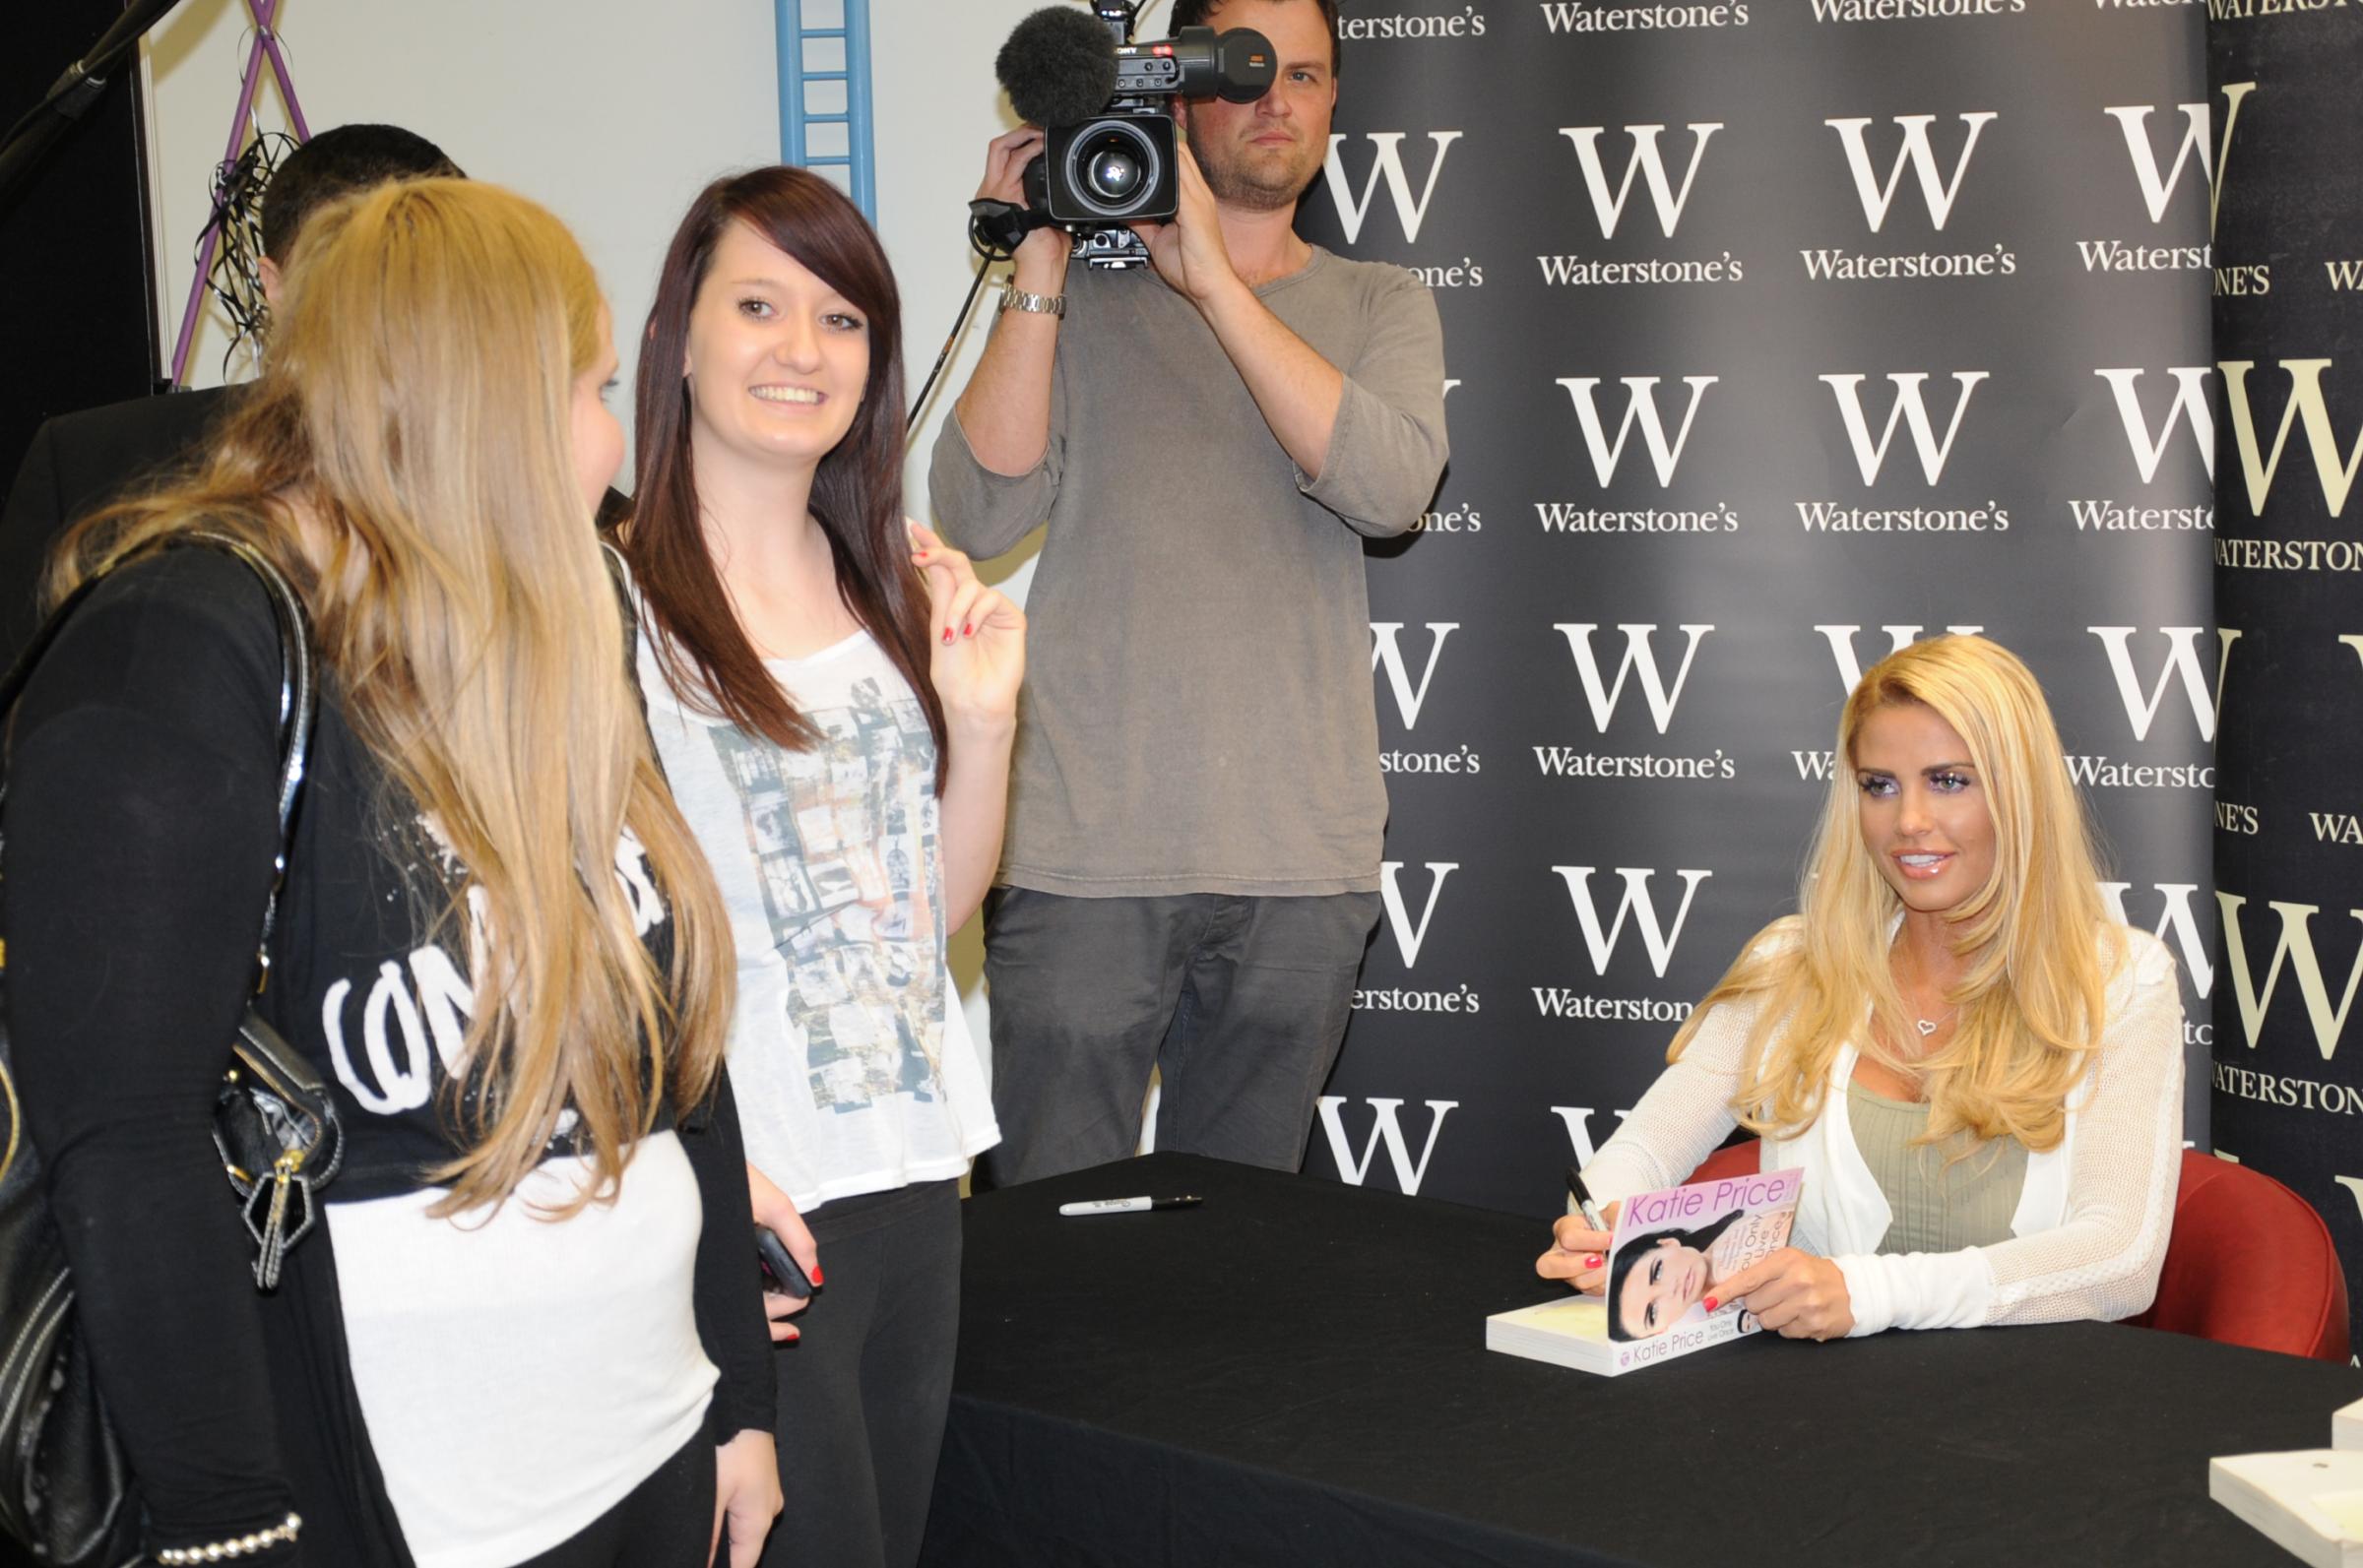 Signing her book - model Katie Price was greeted by thousands of fans at the Waterstones store in the Eastgate Shopping Centre